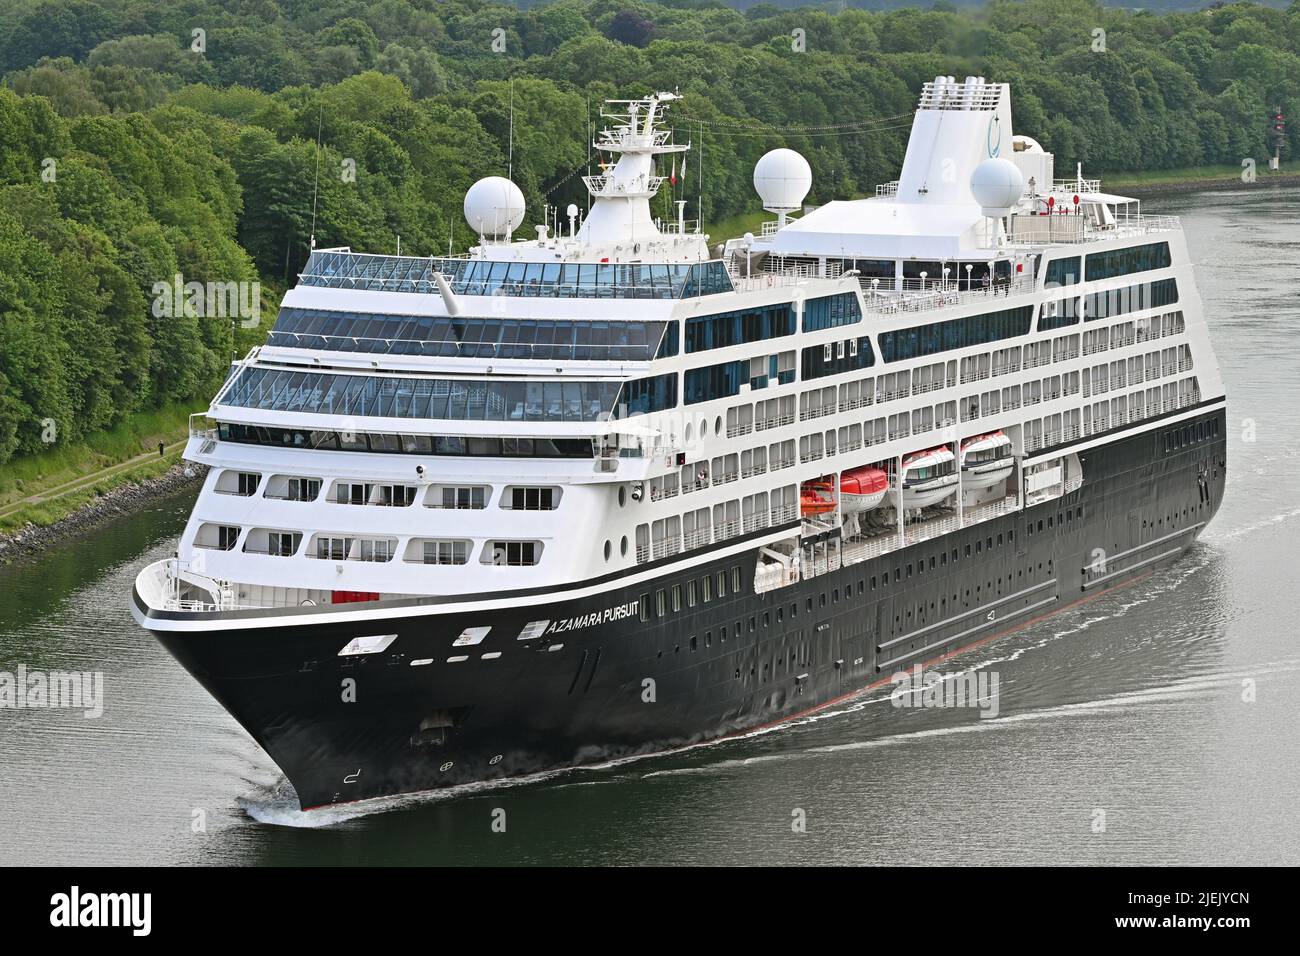 Azamara Signs Retail Partnership With Starboard Cruise Services 